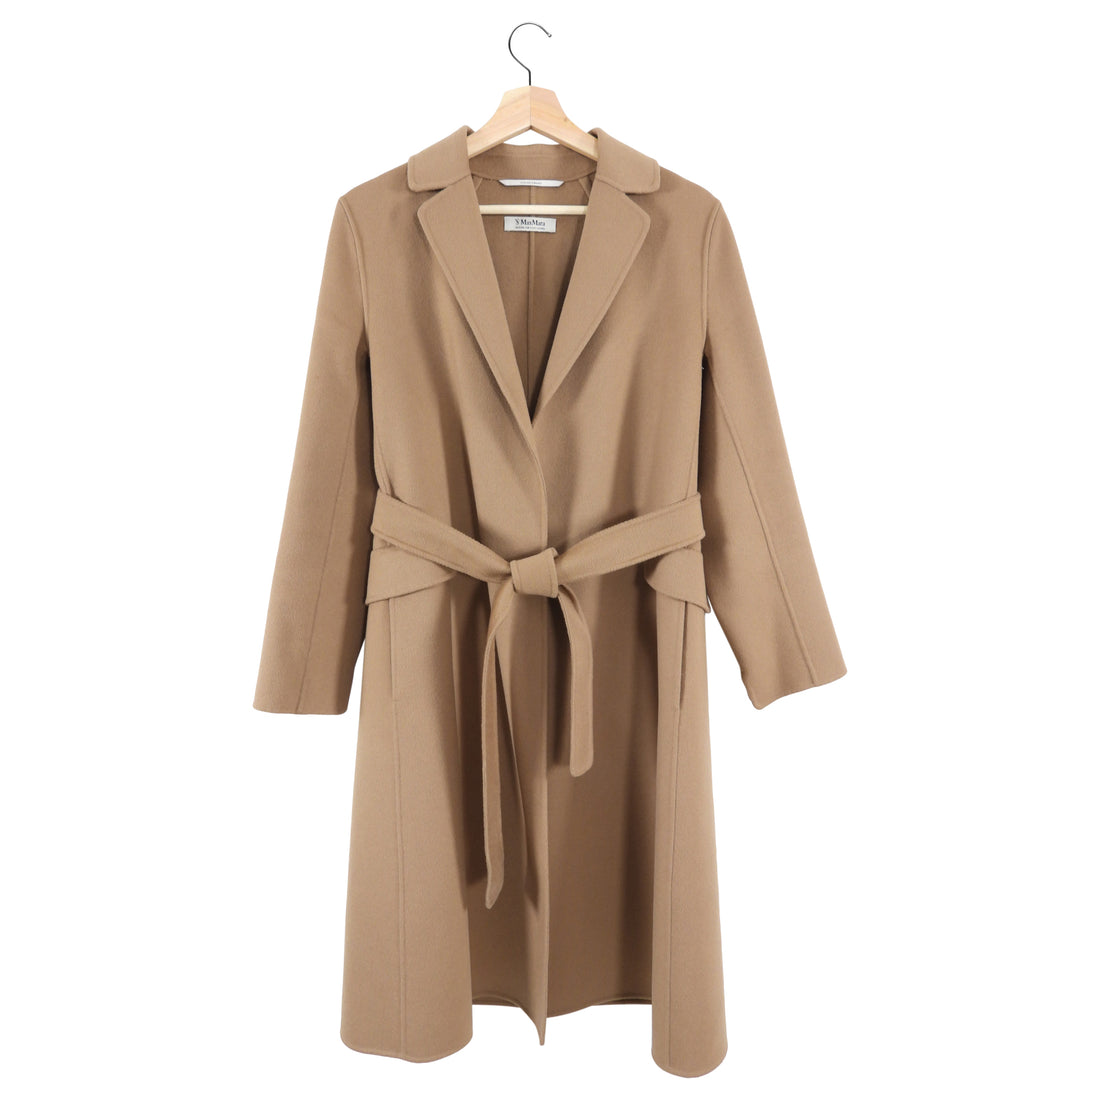 ‘S Max Mara Tan Wool Double Faced Belted Coat - IT38 / USA 2 / 4